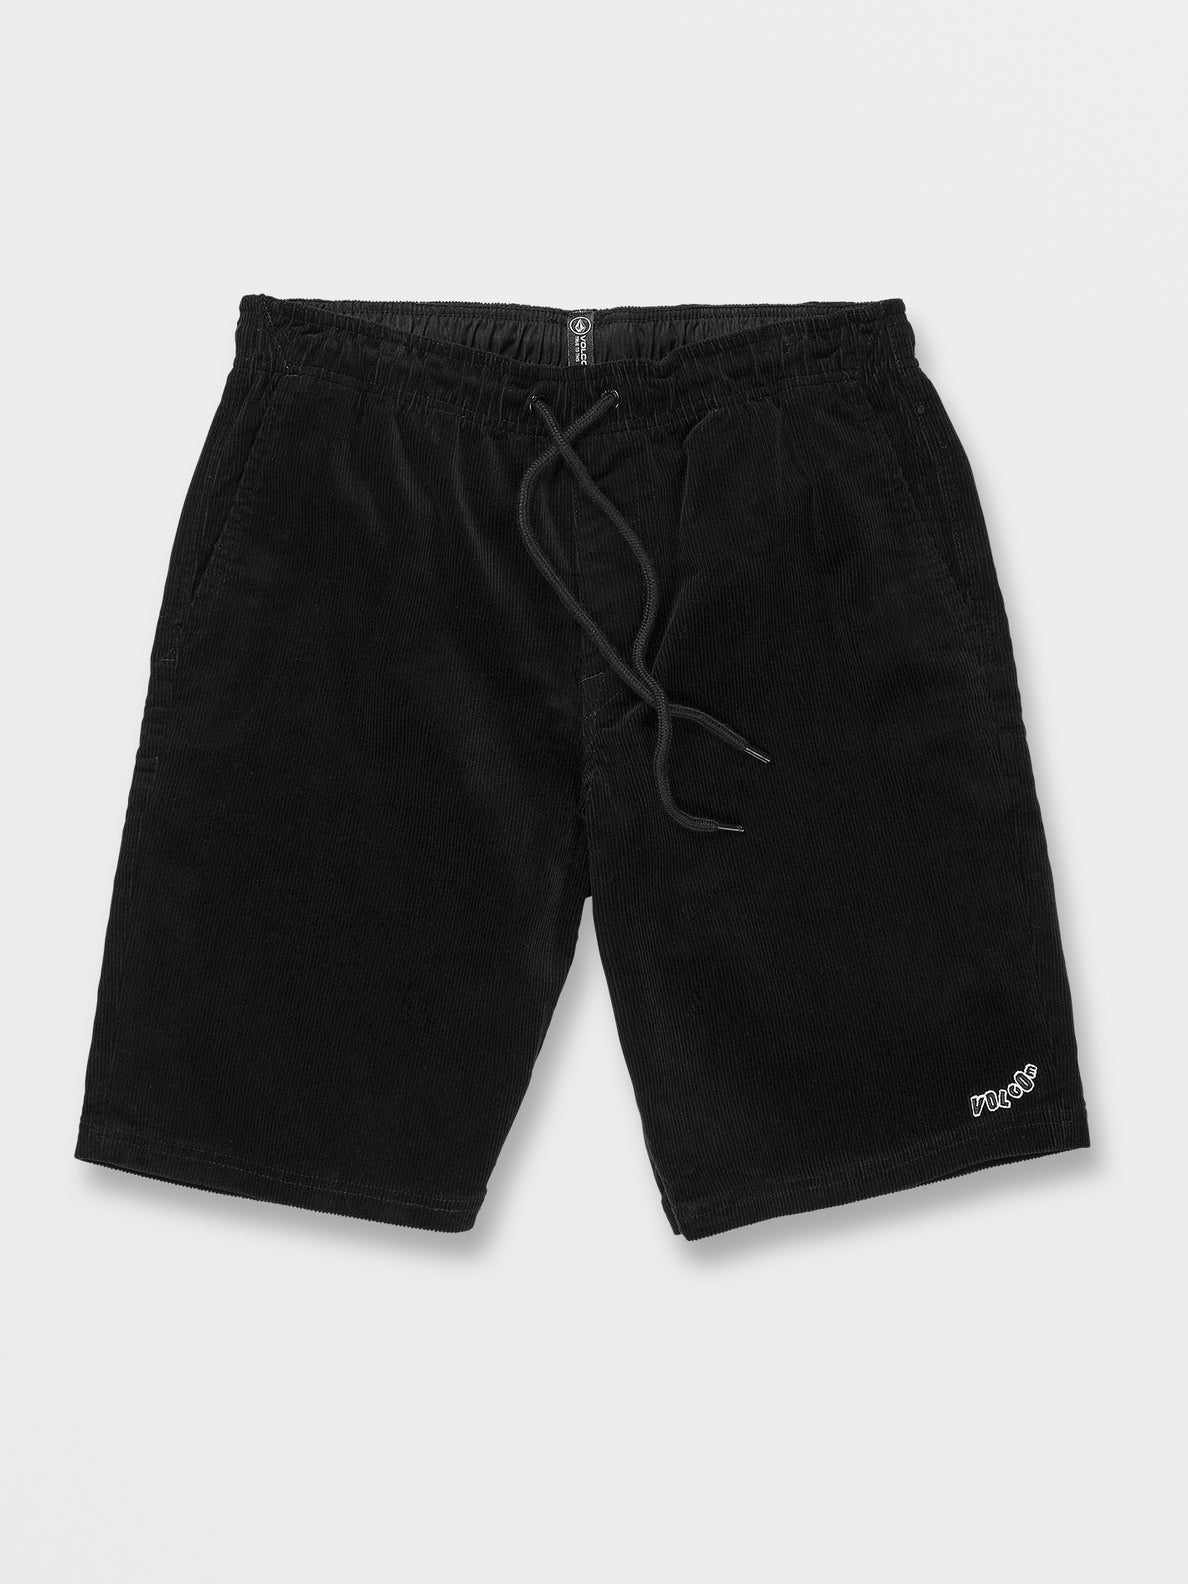 Outer Spaced Elastic Waist Shorts - Black Combo